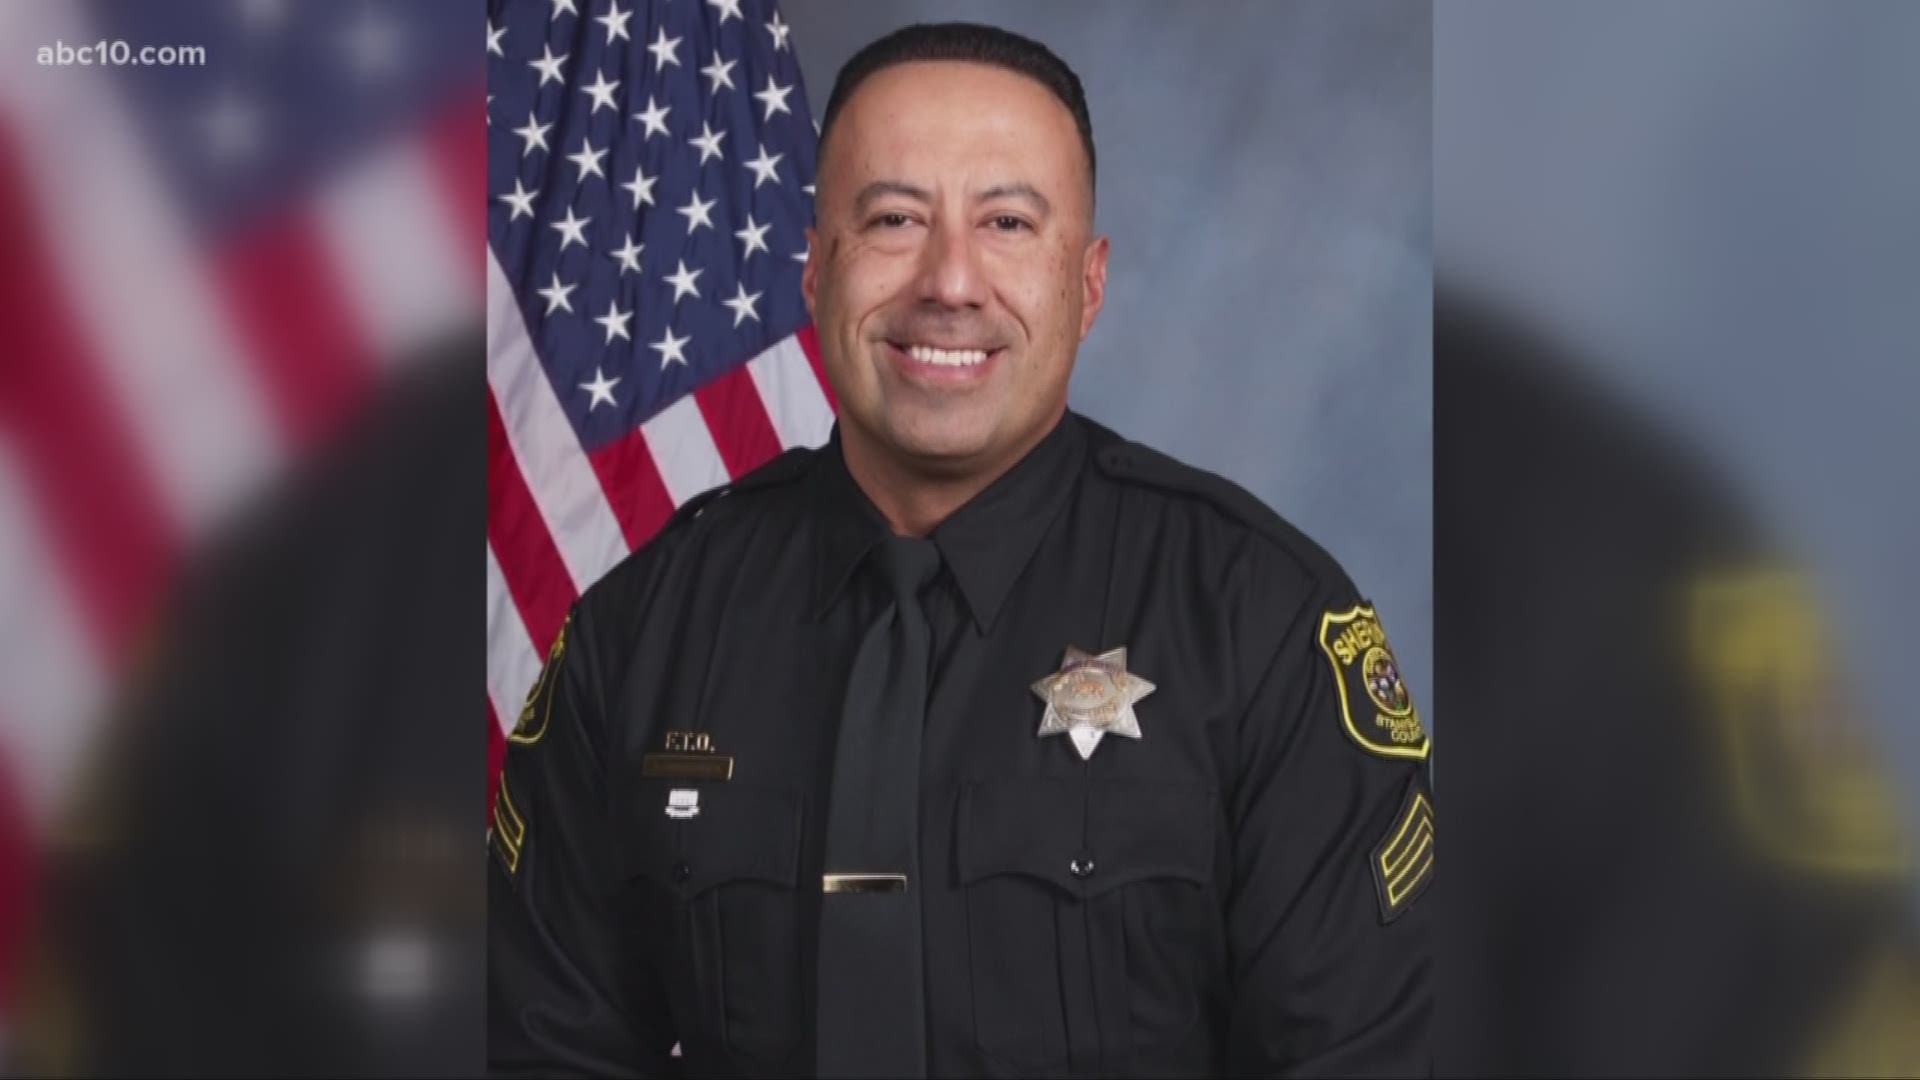 Witnesses describe trying to save Deputy's life moments after tragic crash (November 26, 2018)